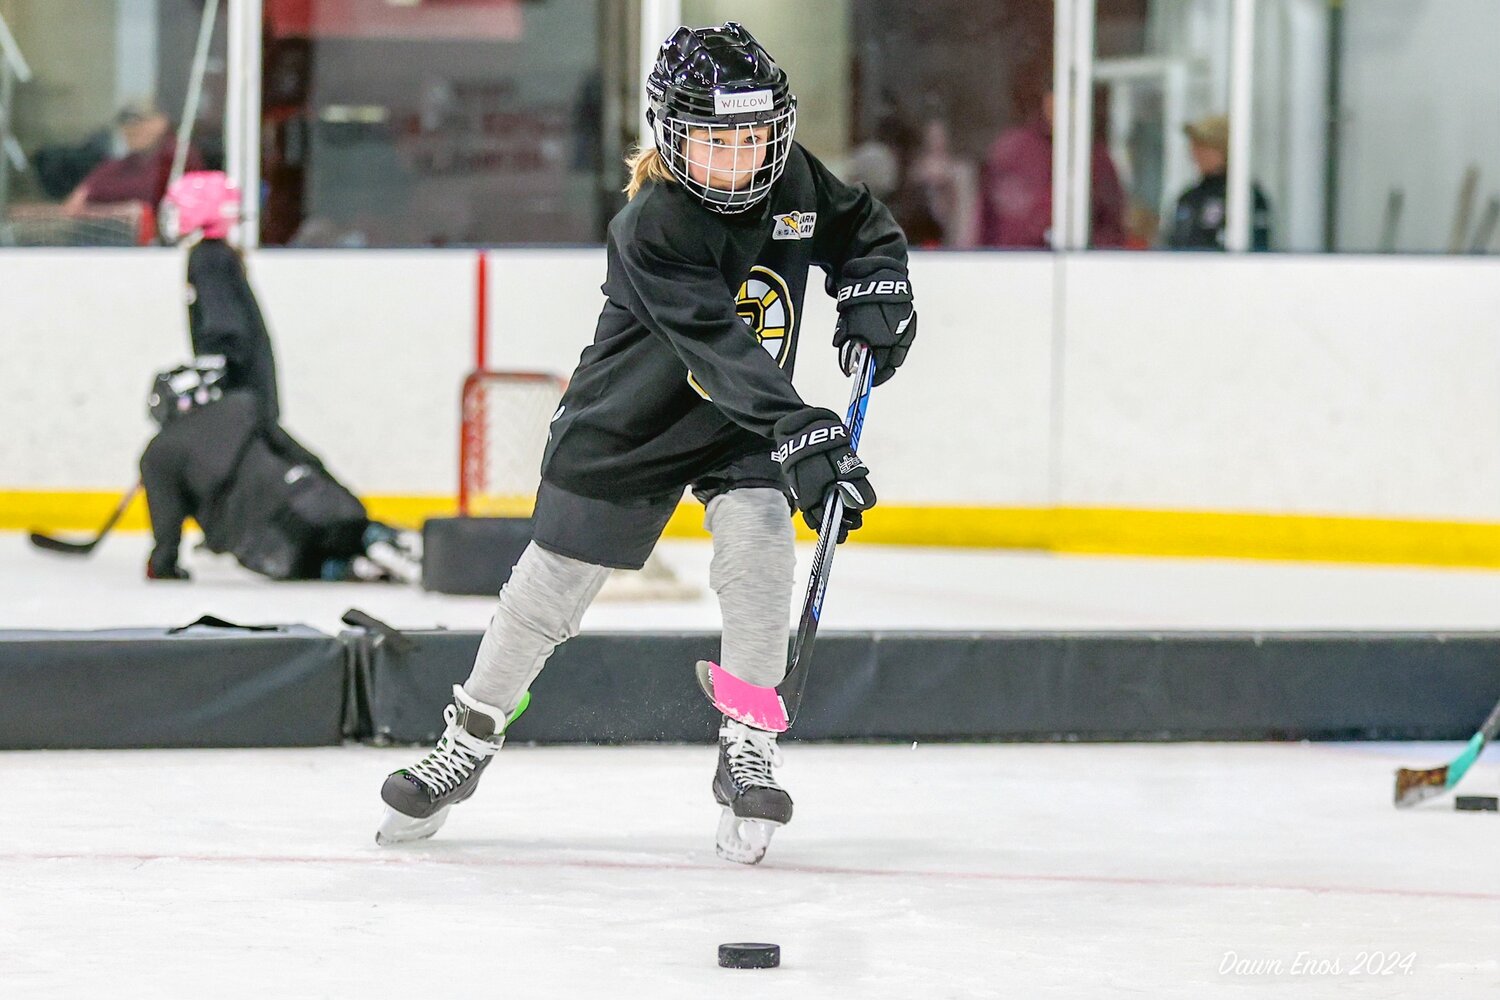 Willow Sanderson from Essex chases down the puck.